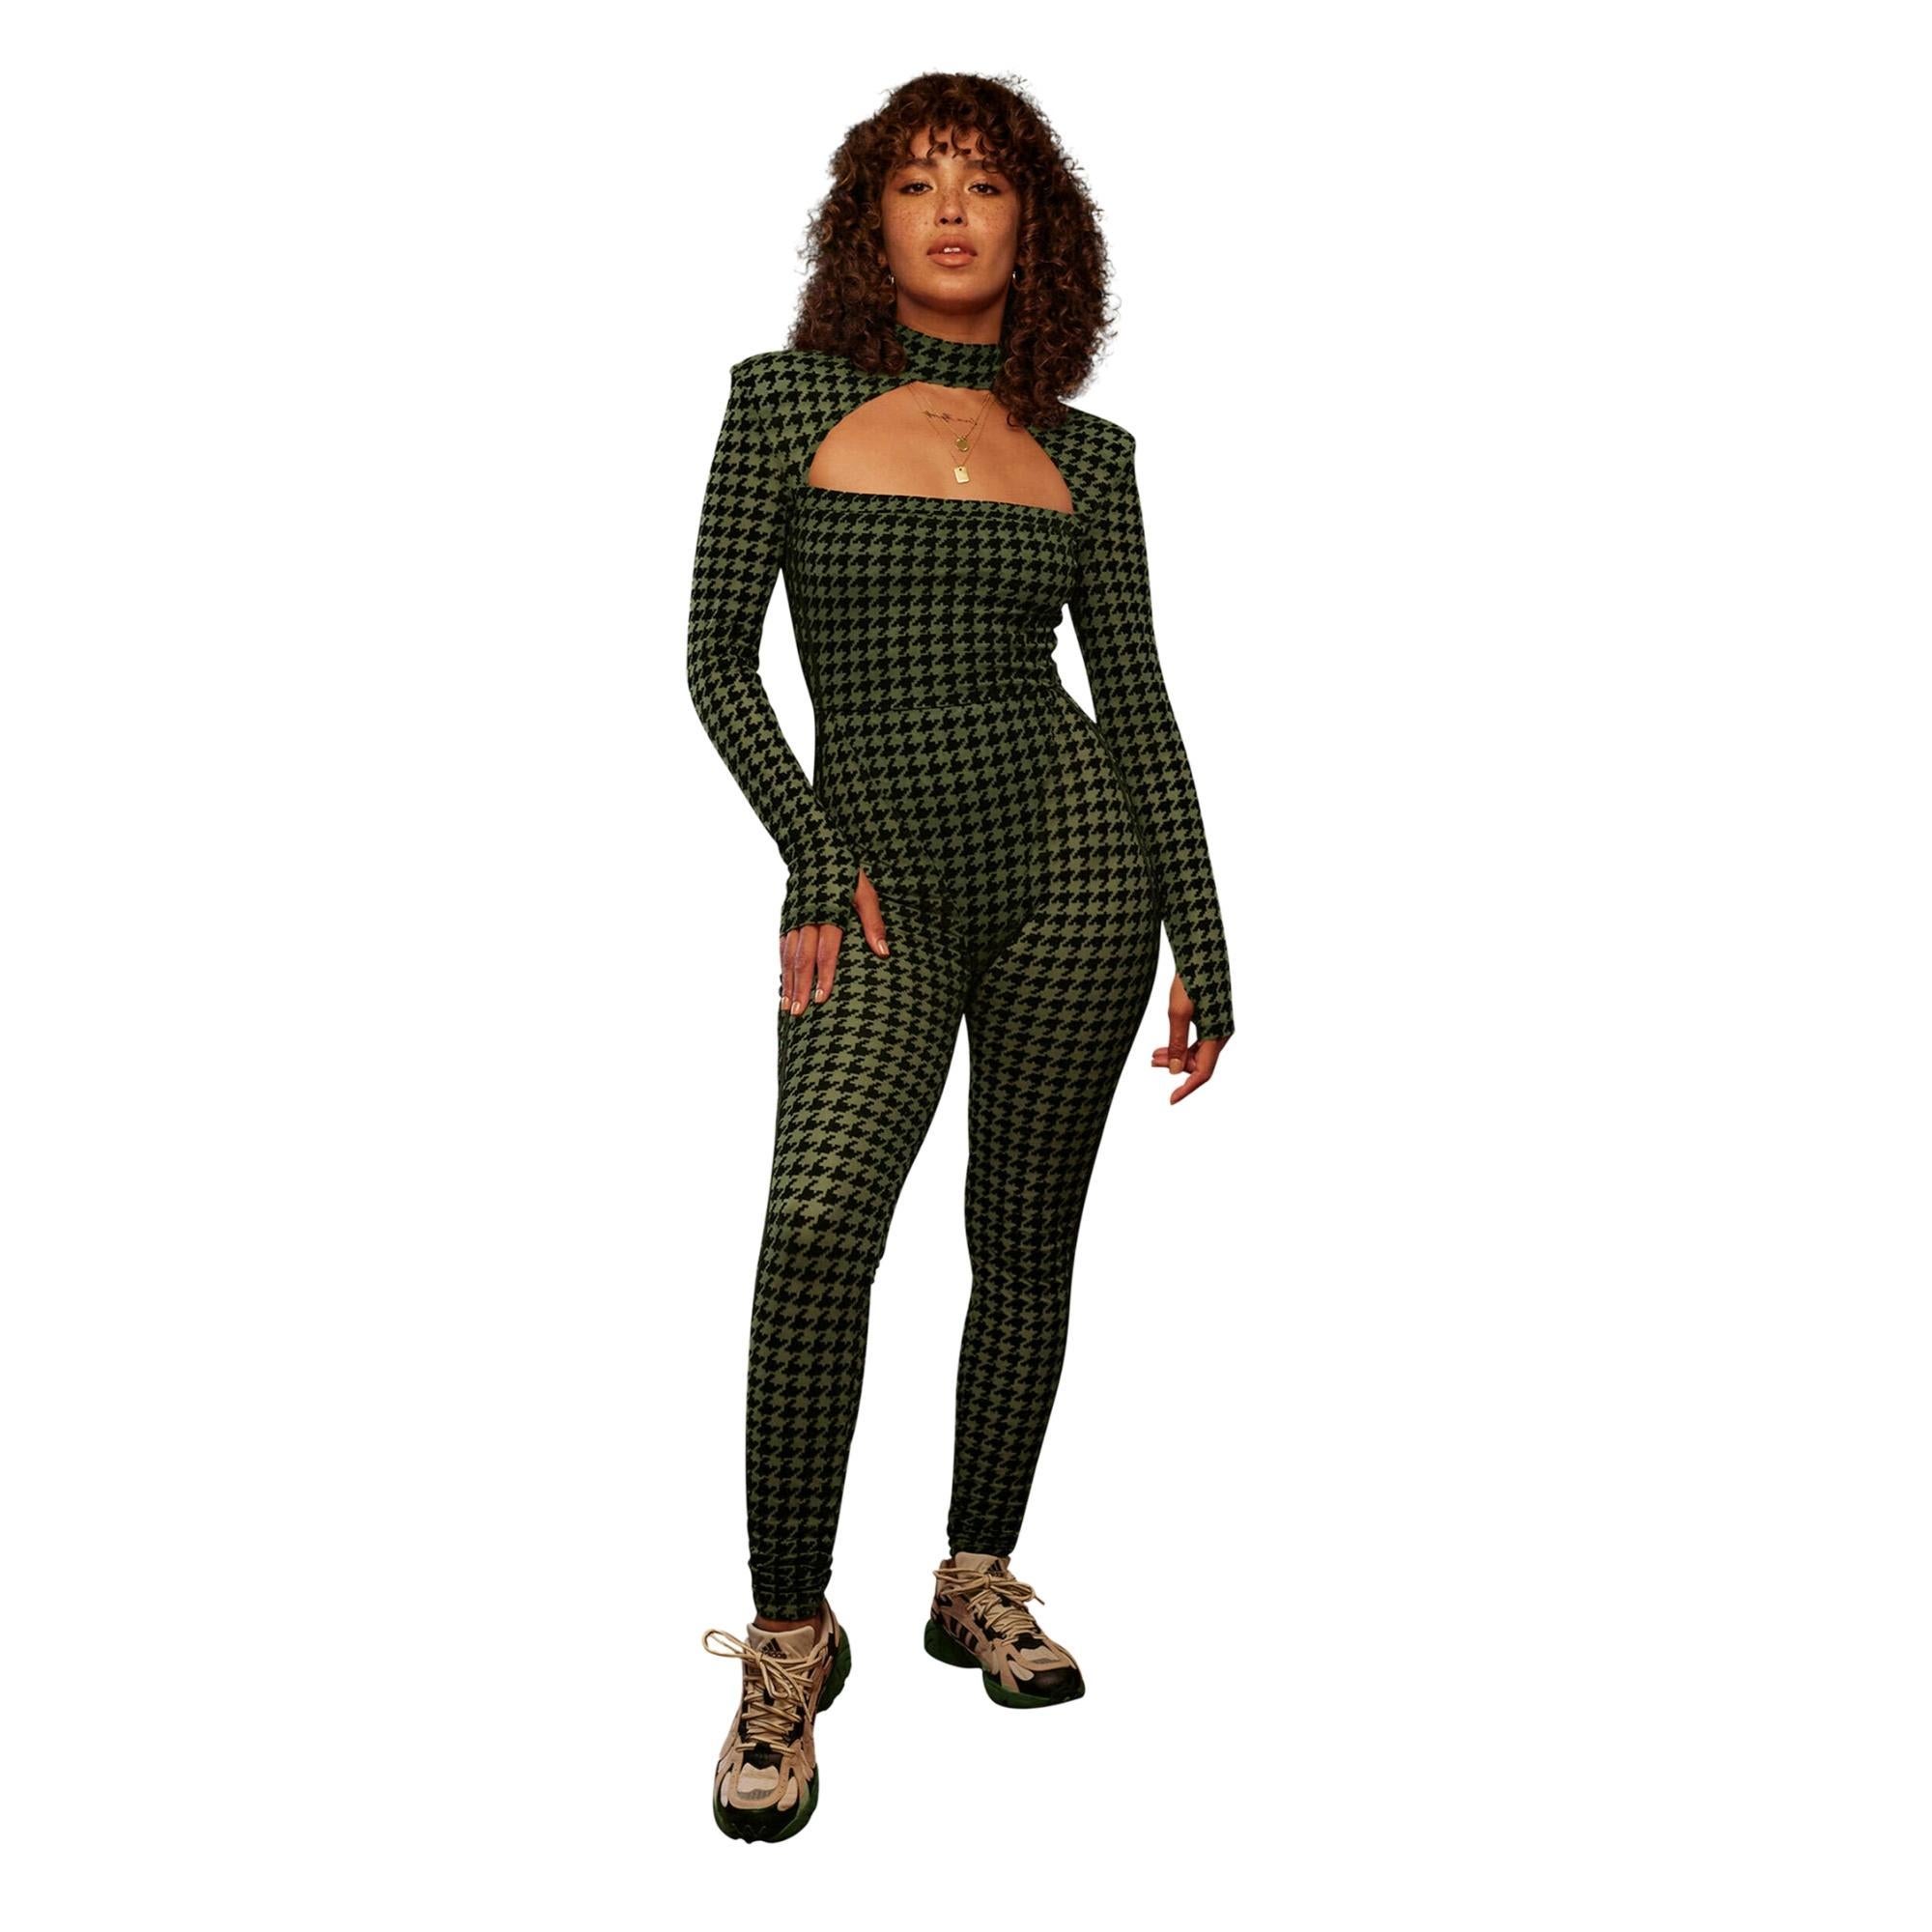 Adidas X Ivy Park Houndstooth Green Turtleneck Jumpsuit (S) In Good Condition For Sale In Montreal, Quebec